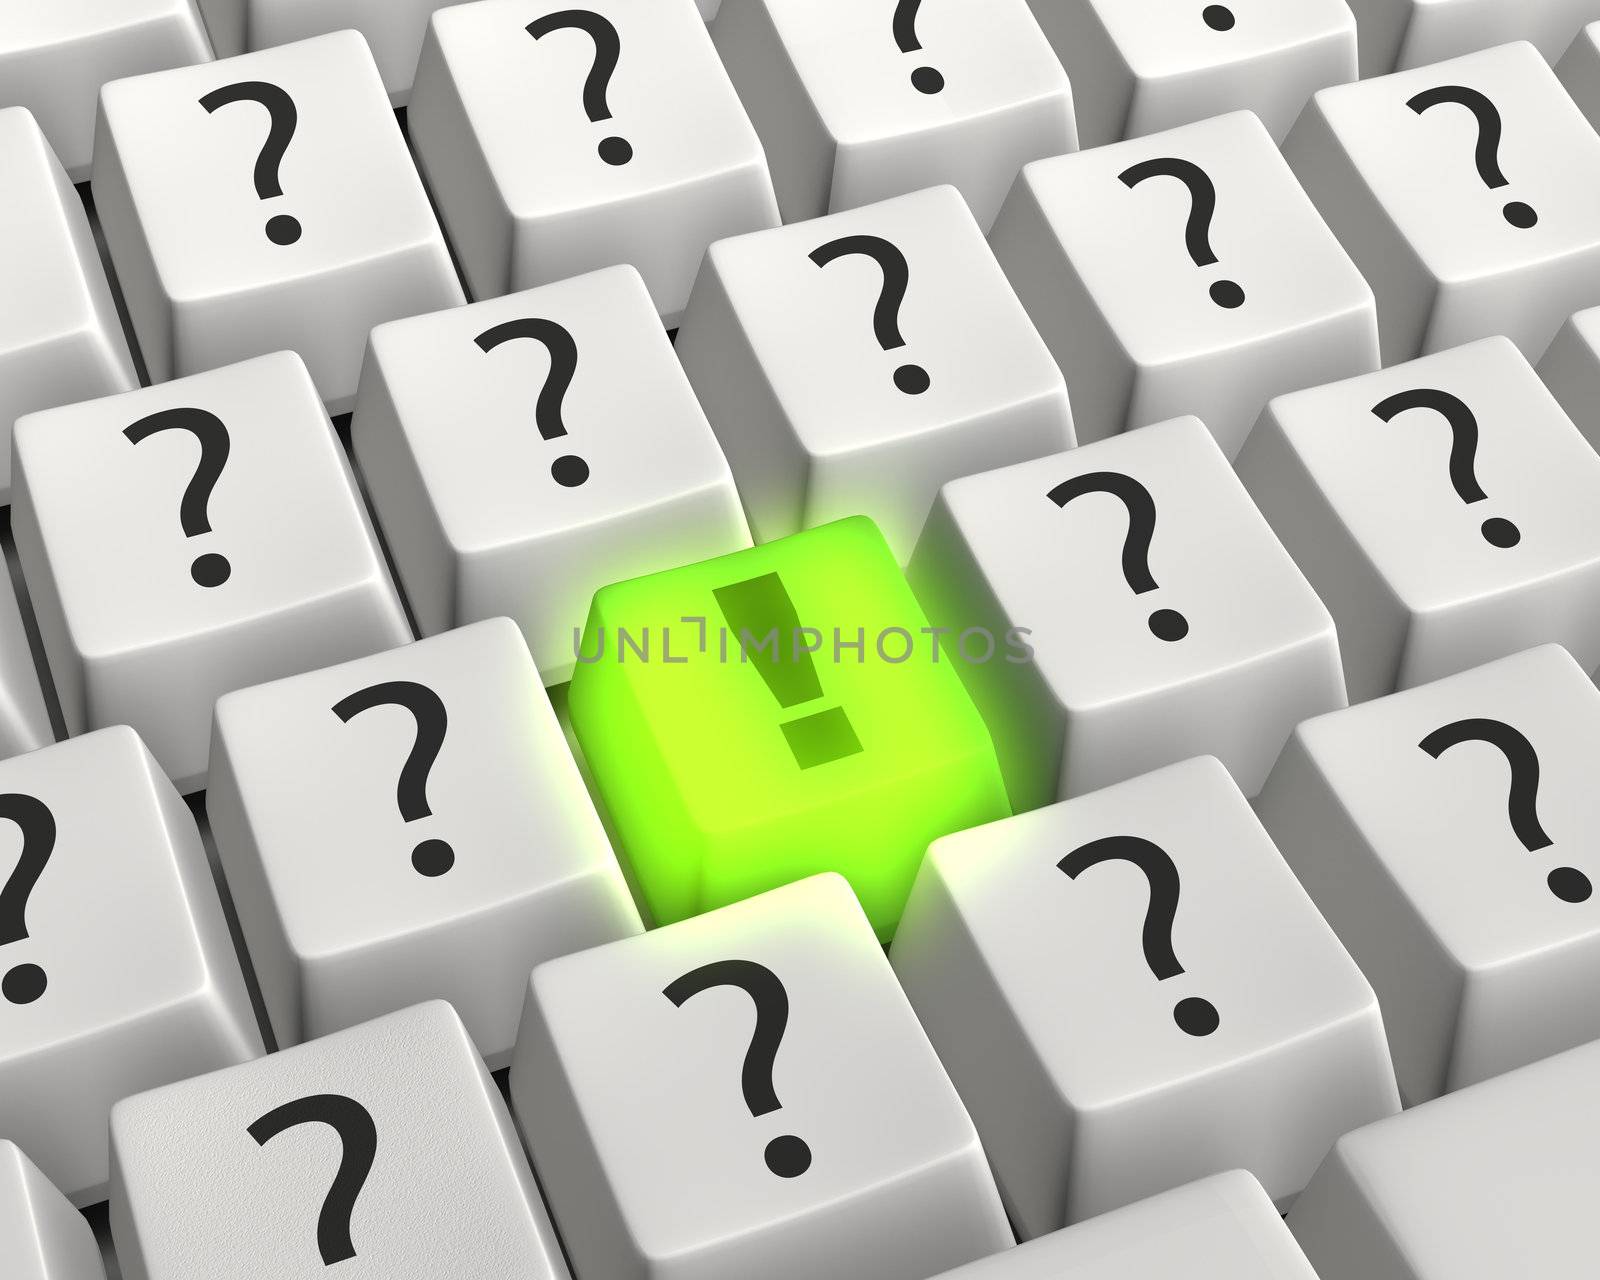 Close up photo-real illustration of a computer keyboard with a green glowing exclamation key surrounded by white question mark keys conveying a bold solution, answer or idea amid technology questions.